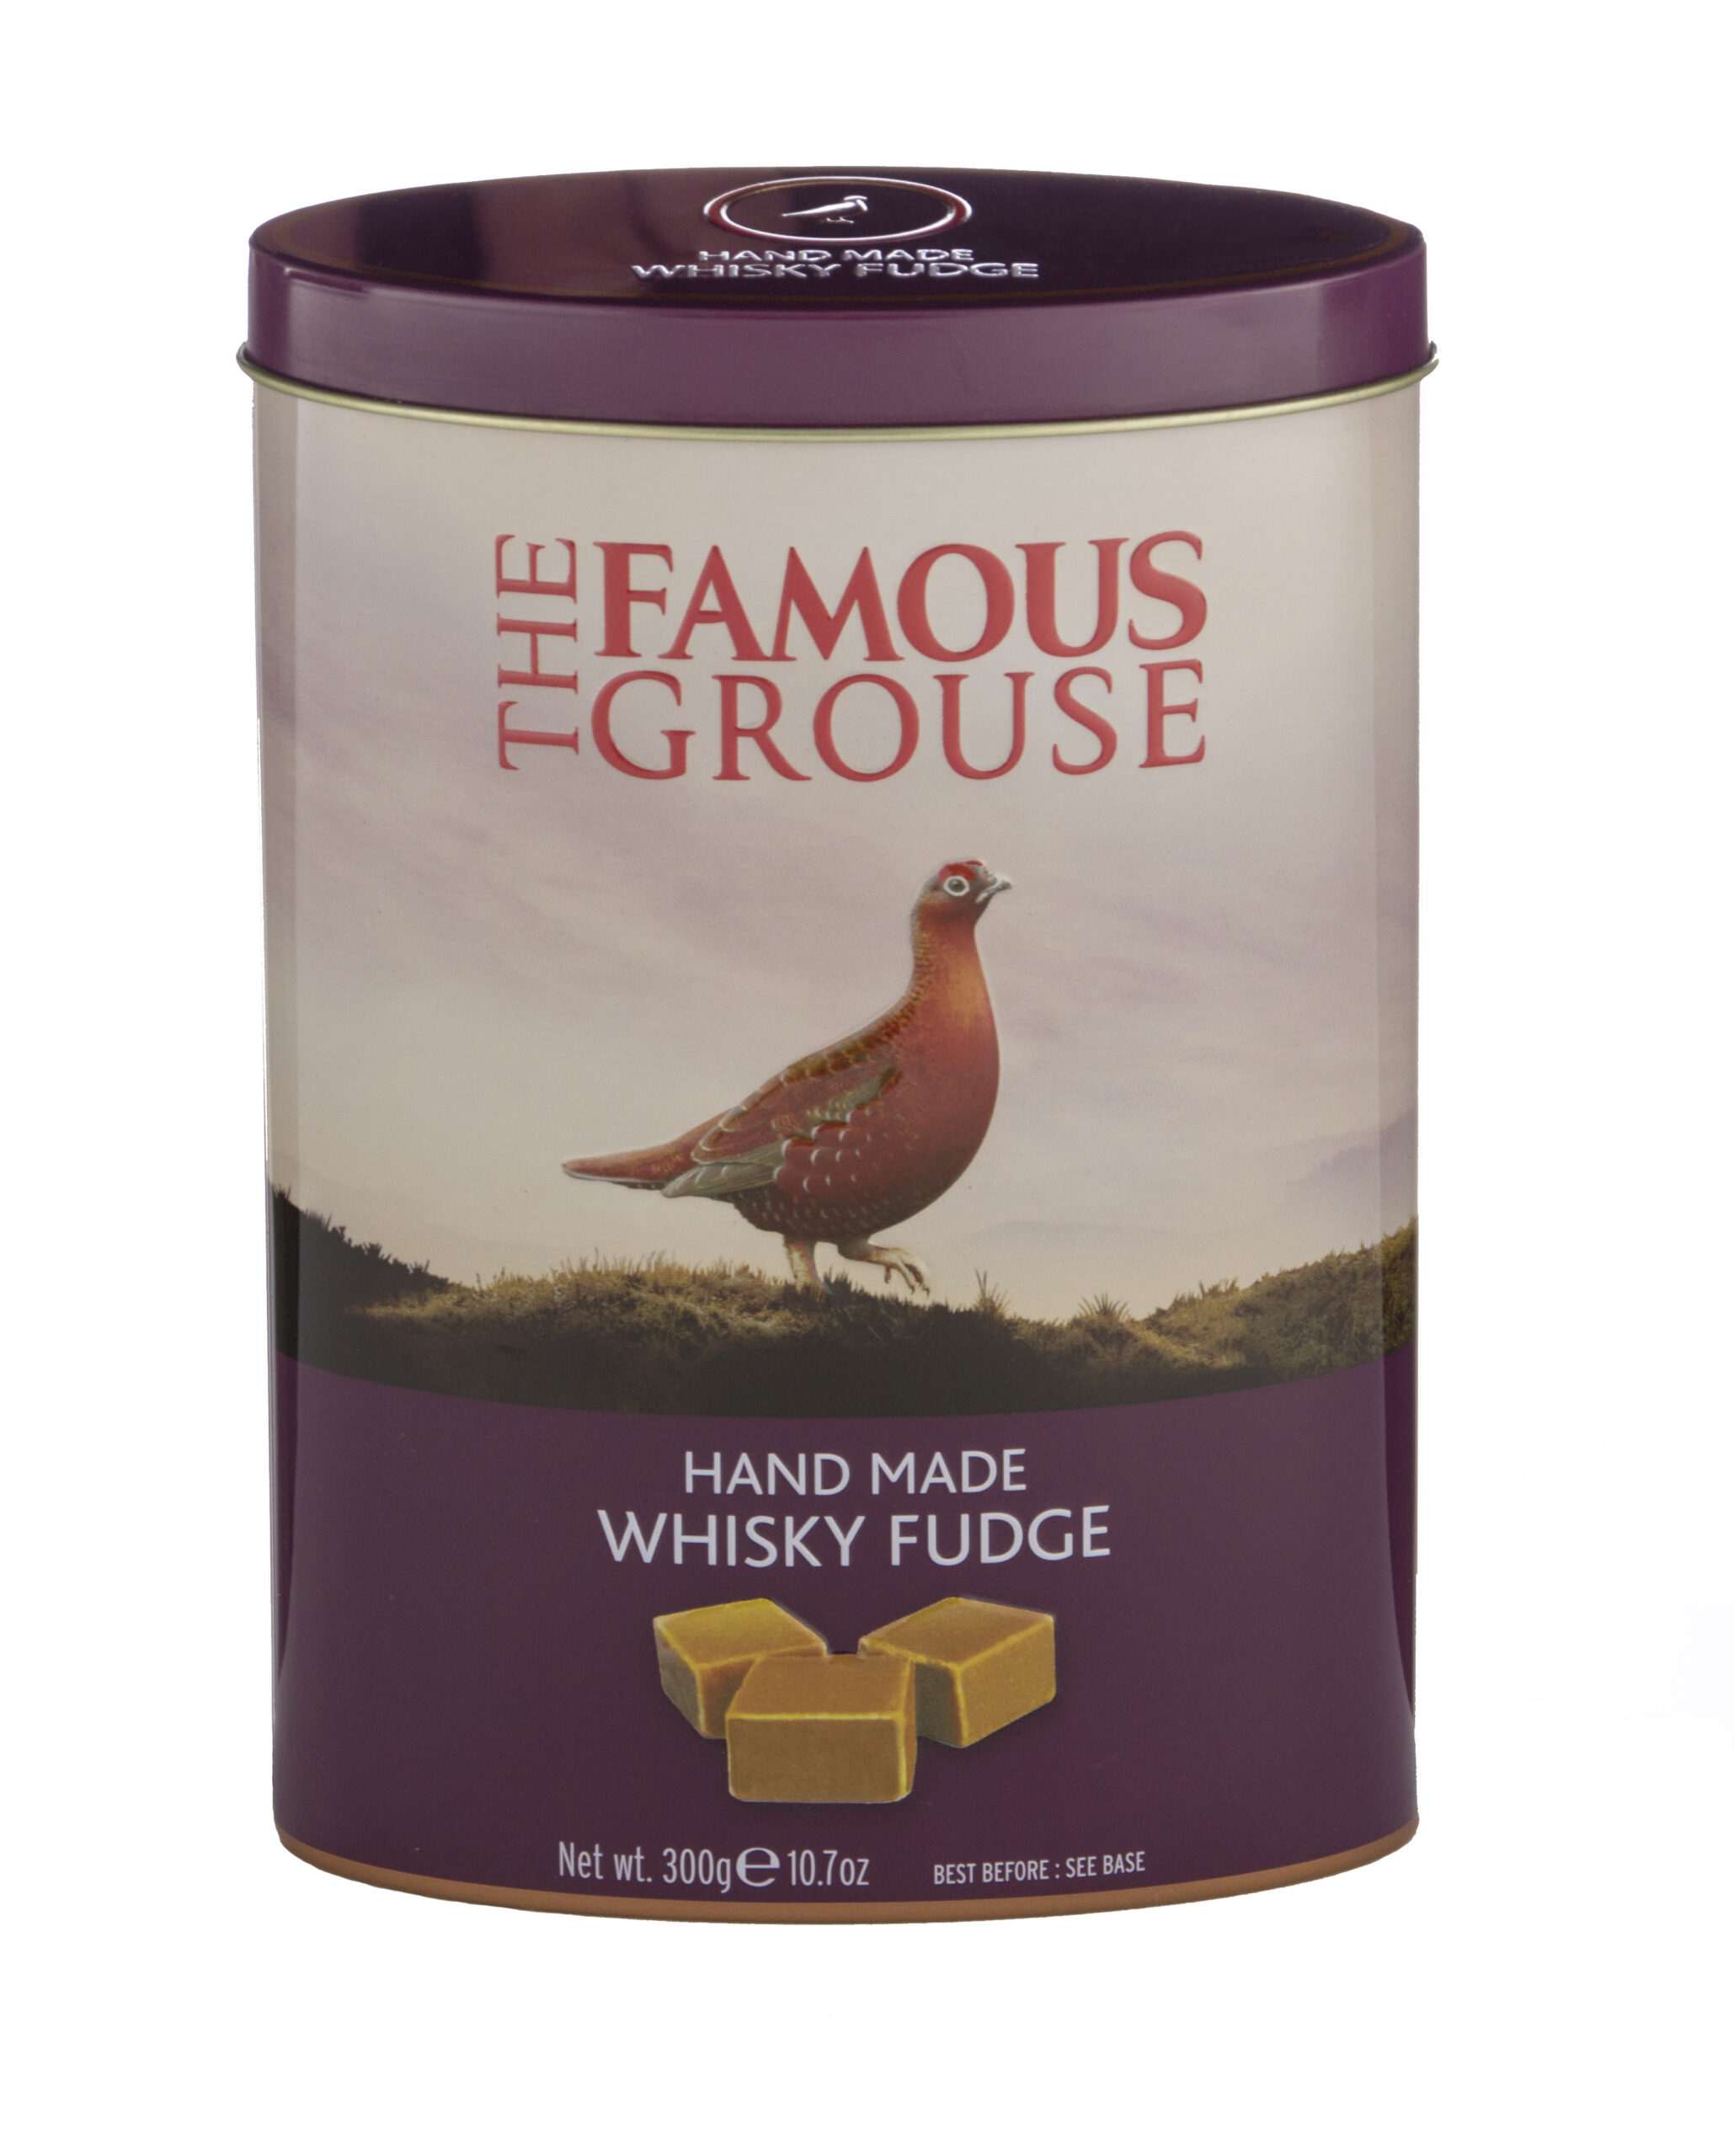 The Famous Grouse 300g